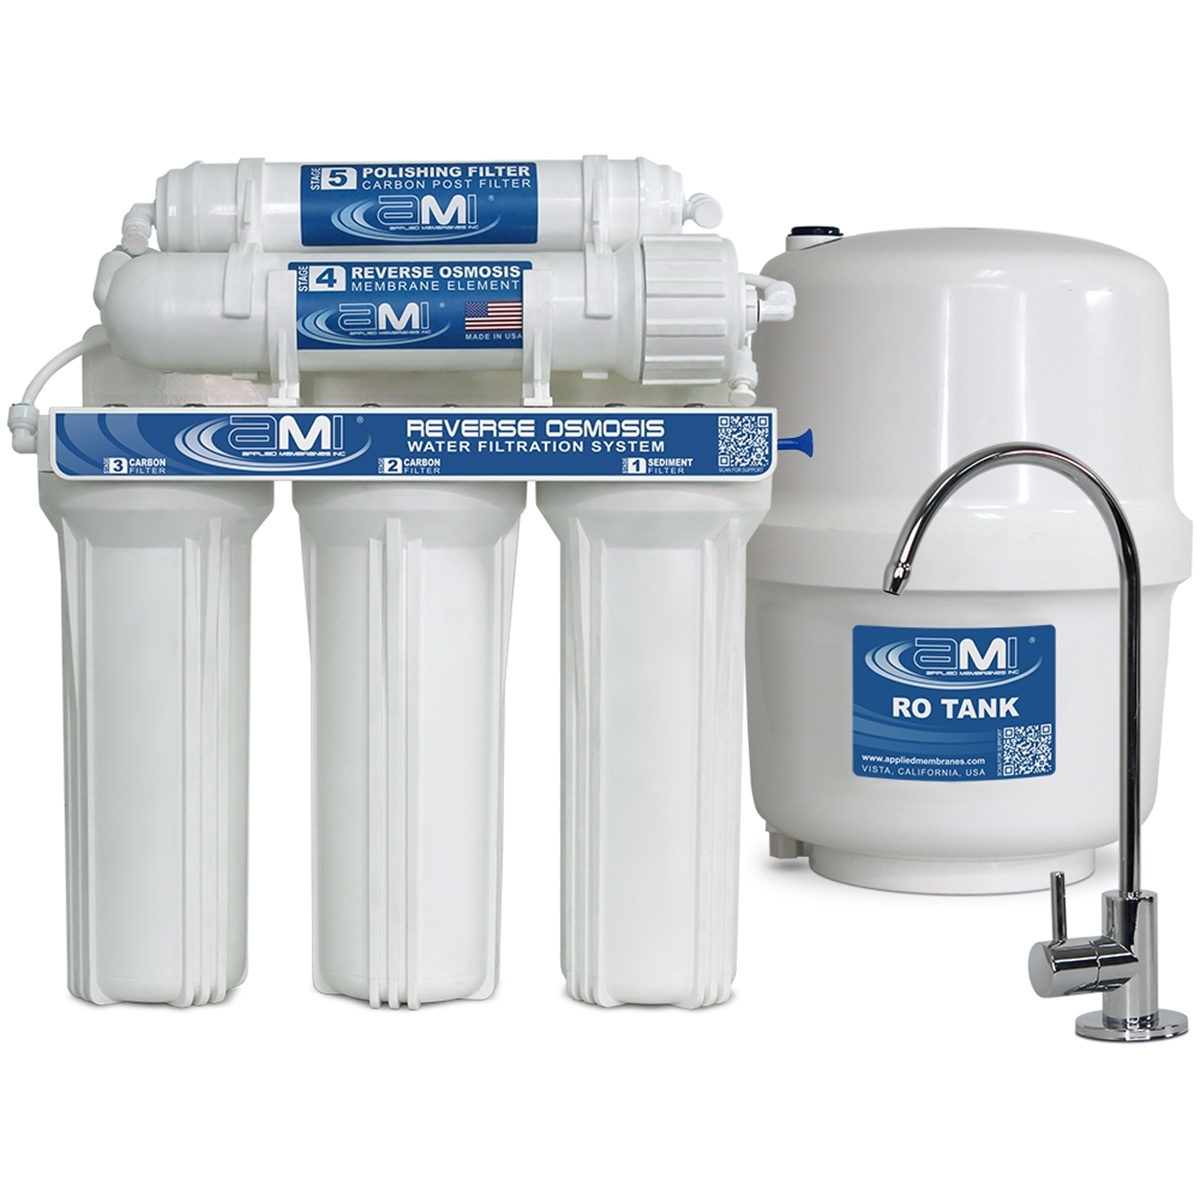 Where To Buy Reverse Osmosis Water Filter